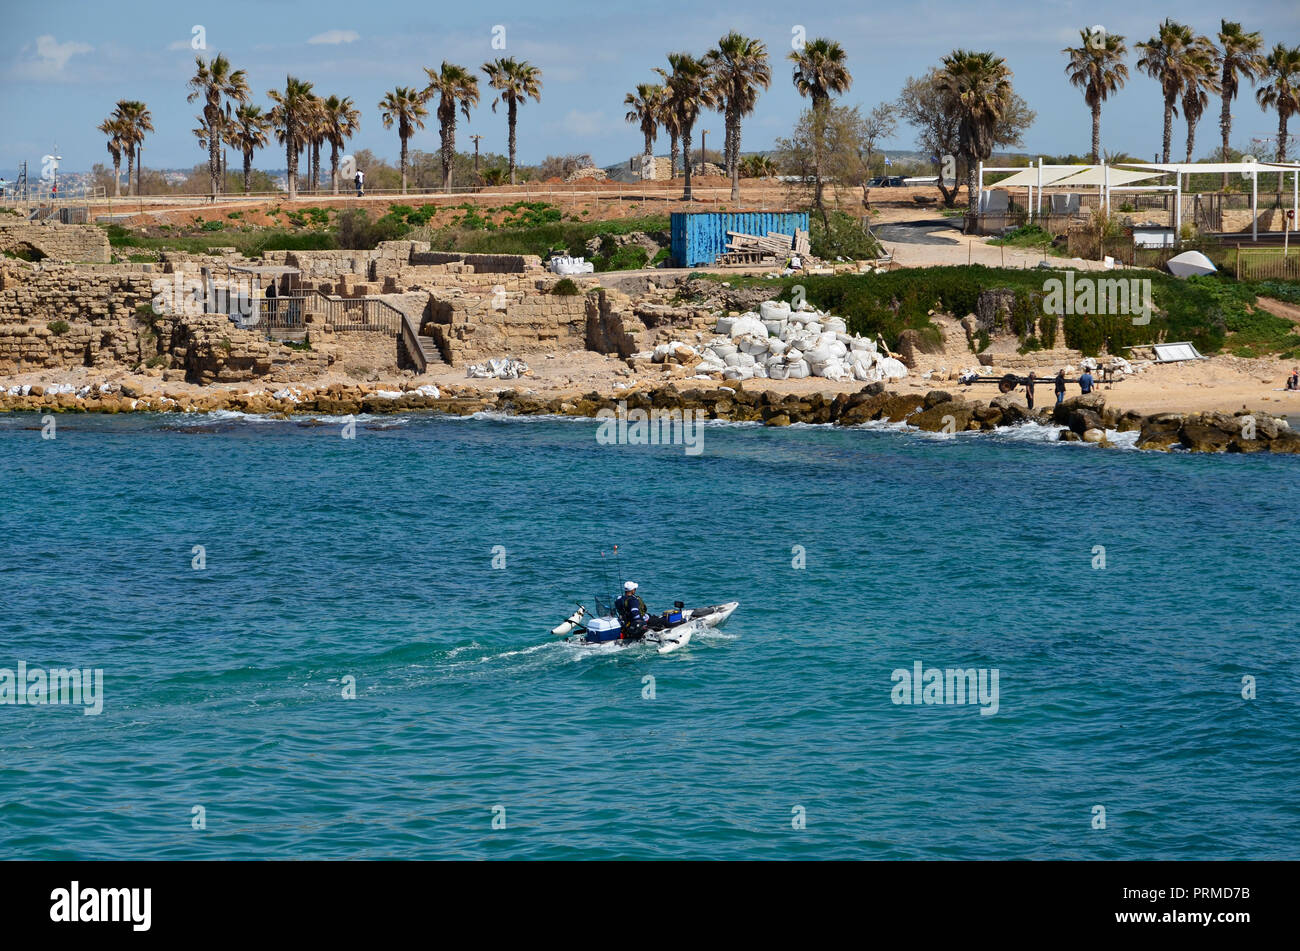 Israel, Caesarea, The old harbour now a resort beach Originally built by Herod the Great in the first century CE Stock Photo